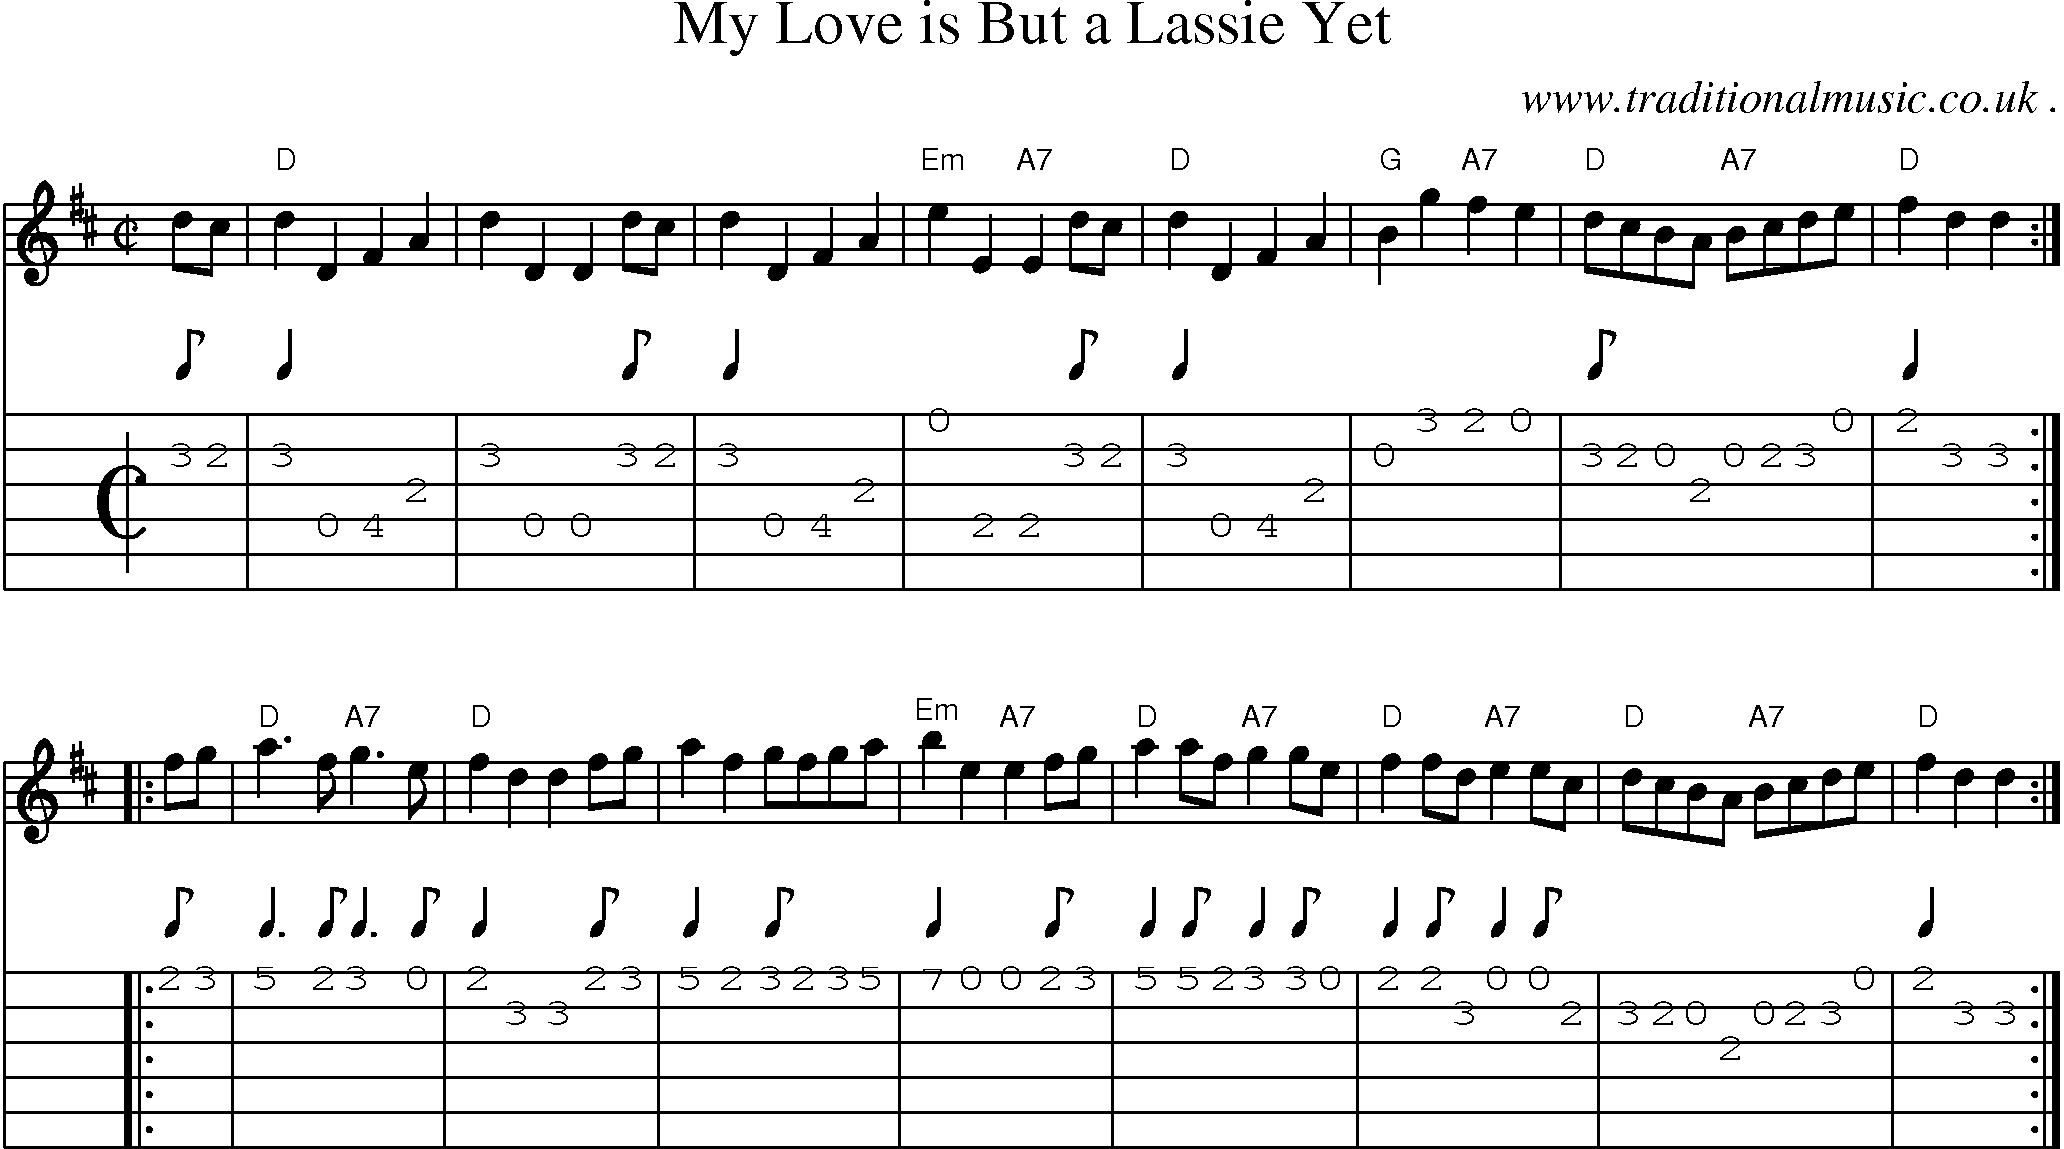 Sheet-music  score, Chords and Guitar Tabs for My Love Is But A Lassie Yet